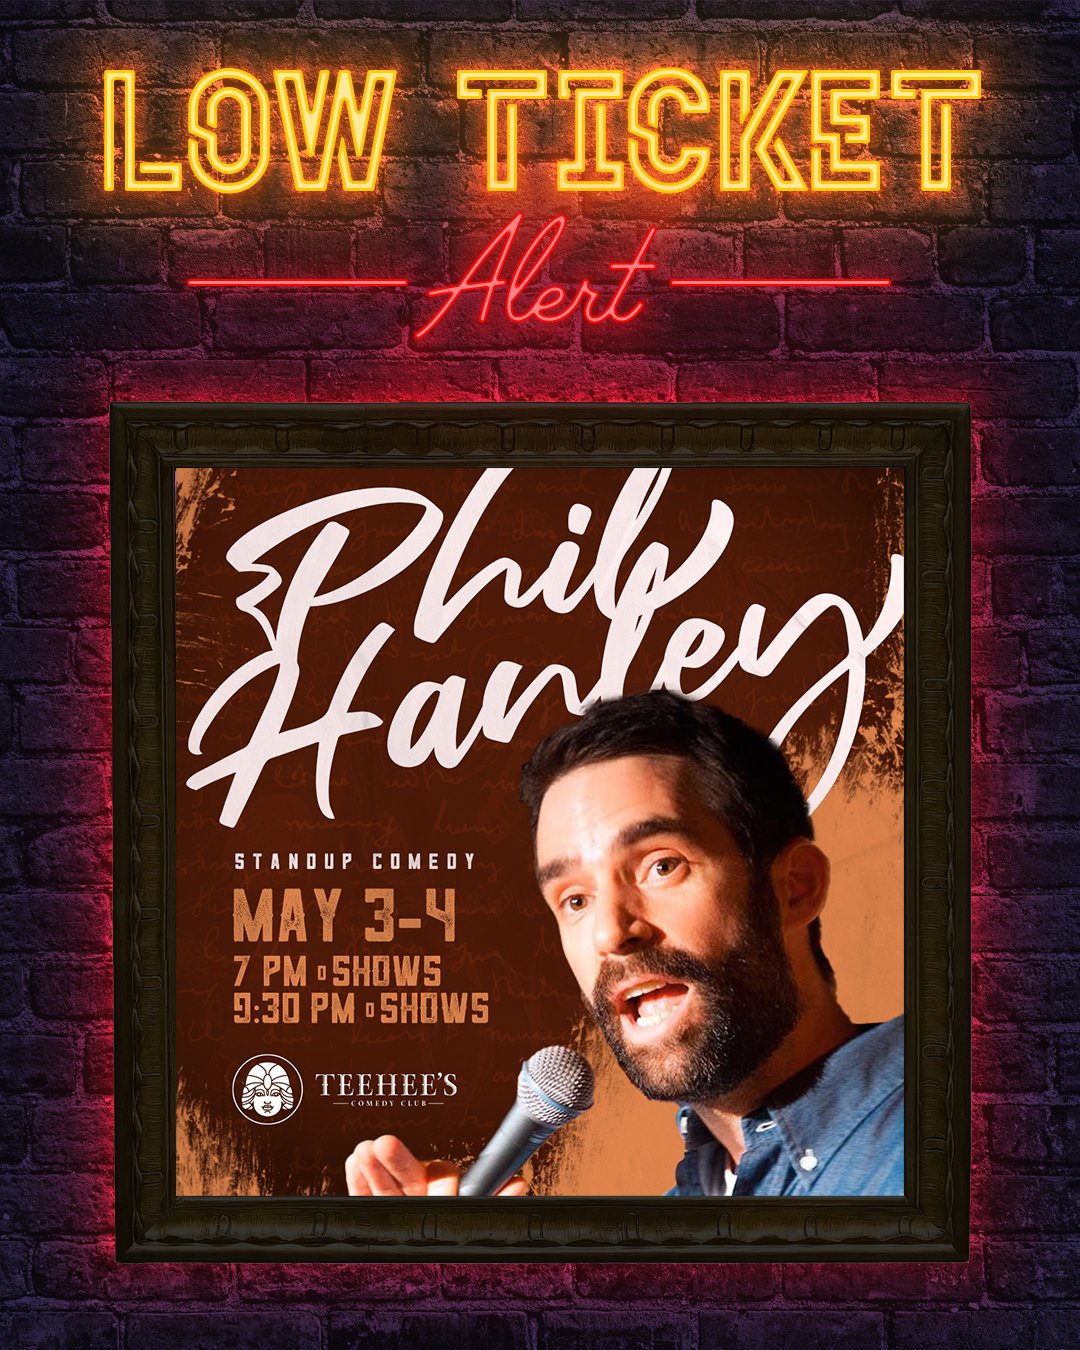 🚨🎟🚨 Just a heads up! The 7pm shows for Phil Hanley on both May 3rd and 4th are running low on advance tickets!
Get 🎟🎟🎟 at teeheescomedy.com/shows